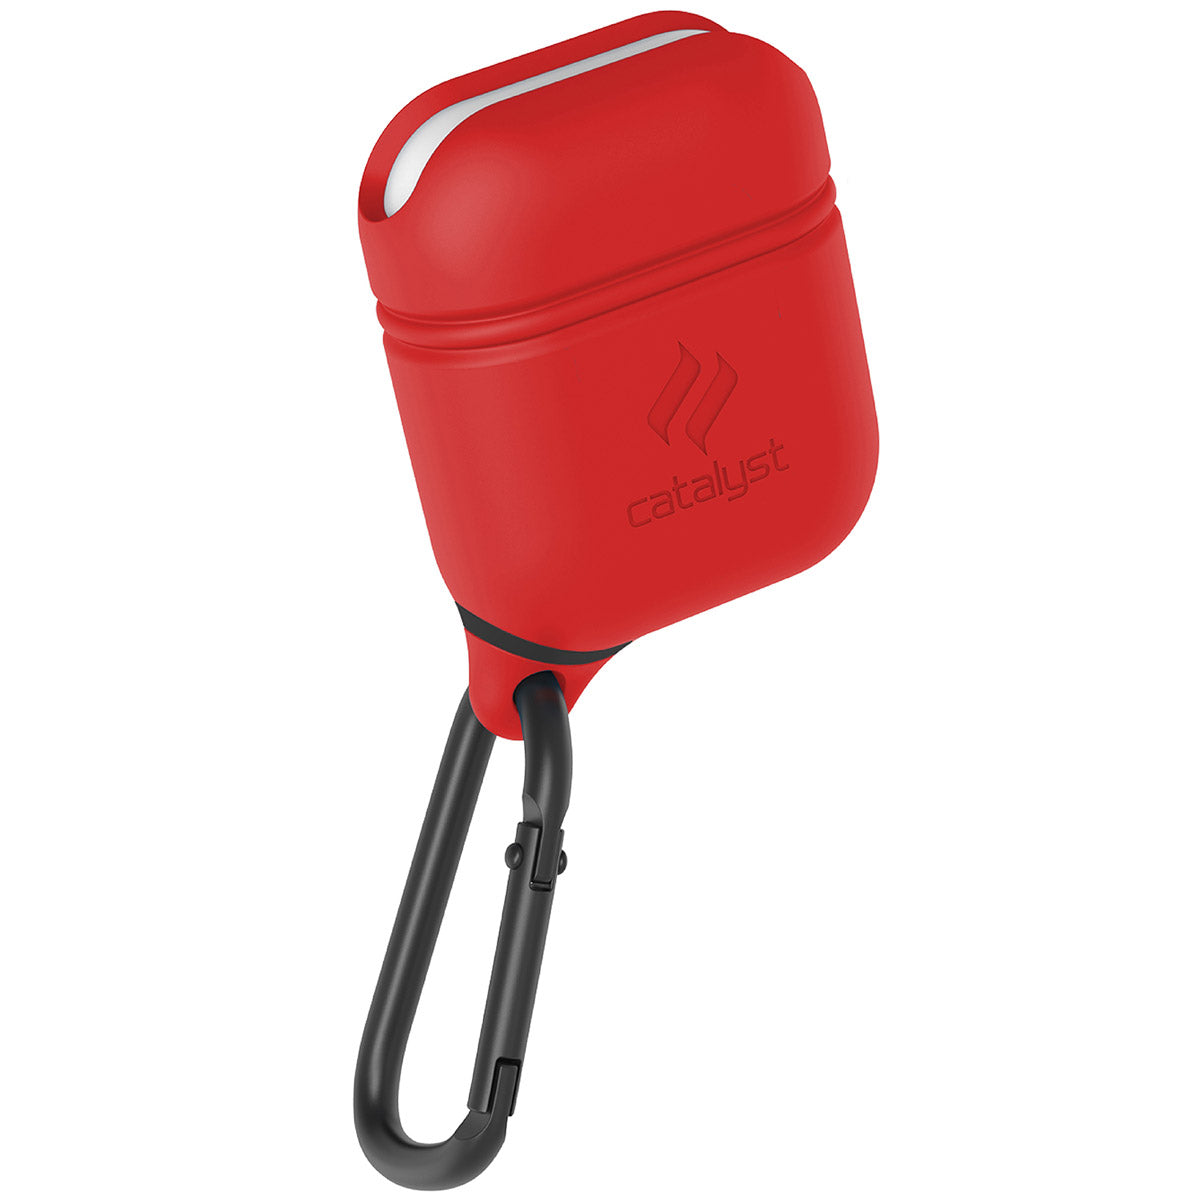 Catalyst airpods gen2/1 waterproof case + carabiner showing the front view of the case in flame red